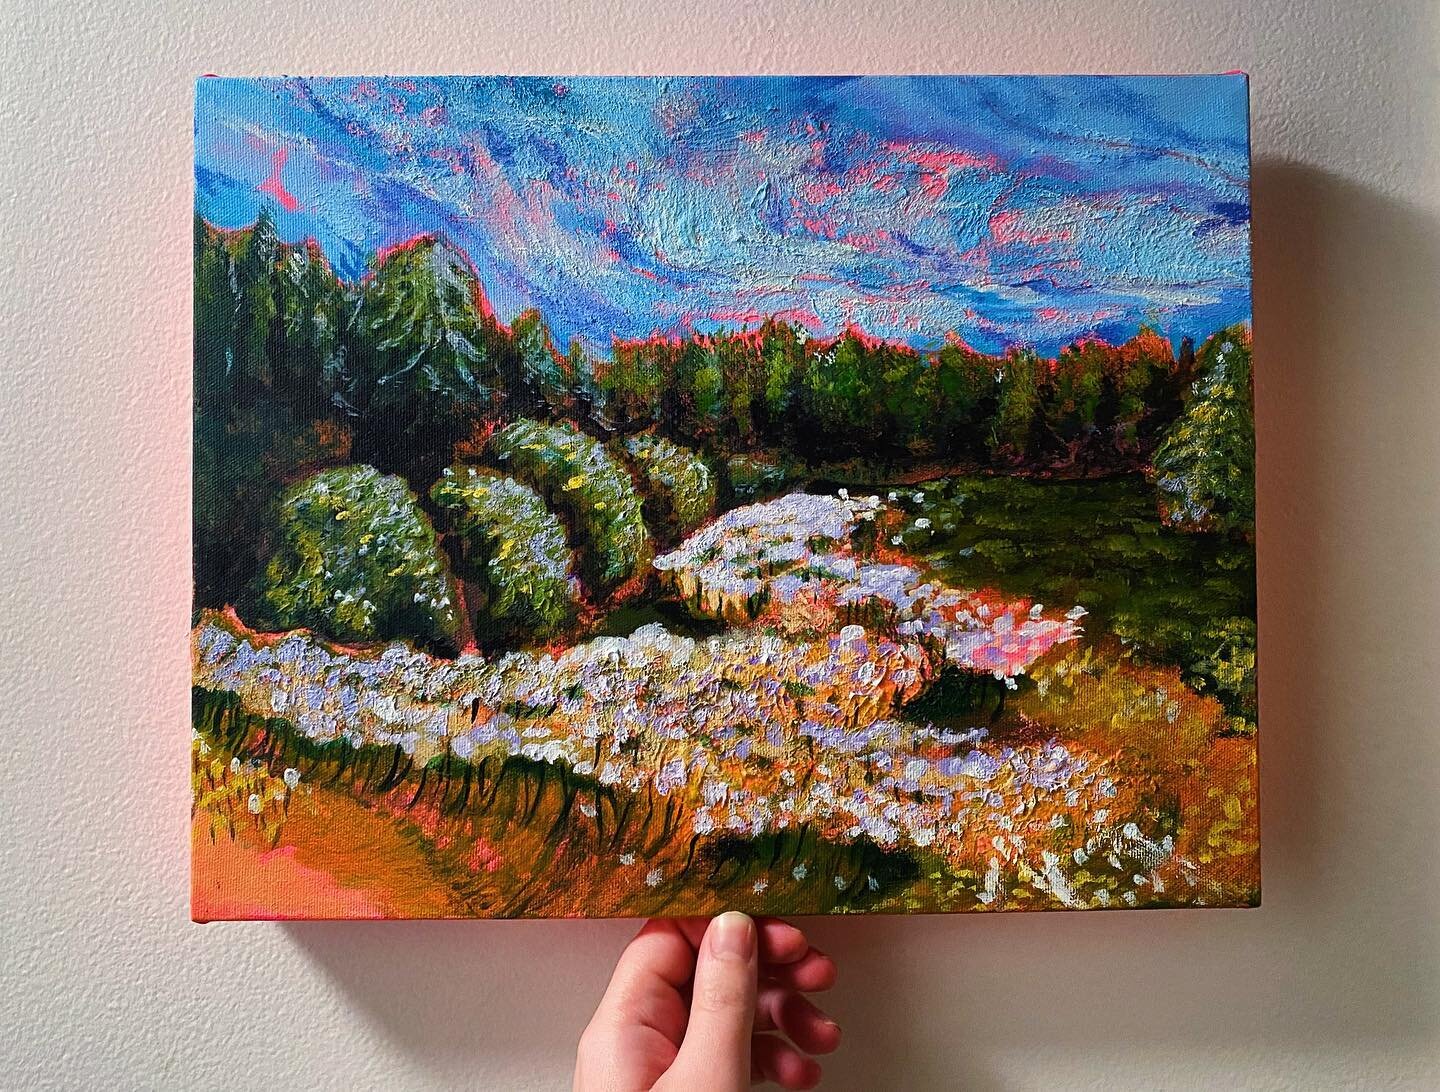 This is &ldquo;Field of Dreams&rdquo;, from the photo I had teased a while ago! This was an experimentation in texture. I finally made use of some cool molding paste I&rsquo;ve had sitting in my studio for ages! 

#painting #acrylicpainting #acrylic 